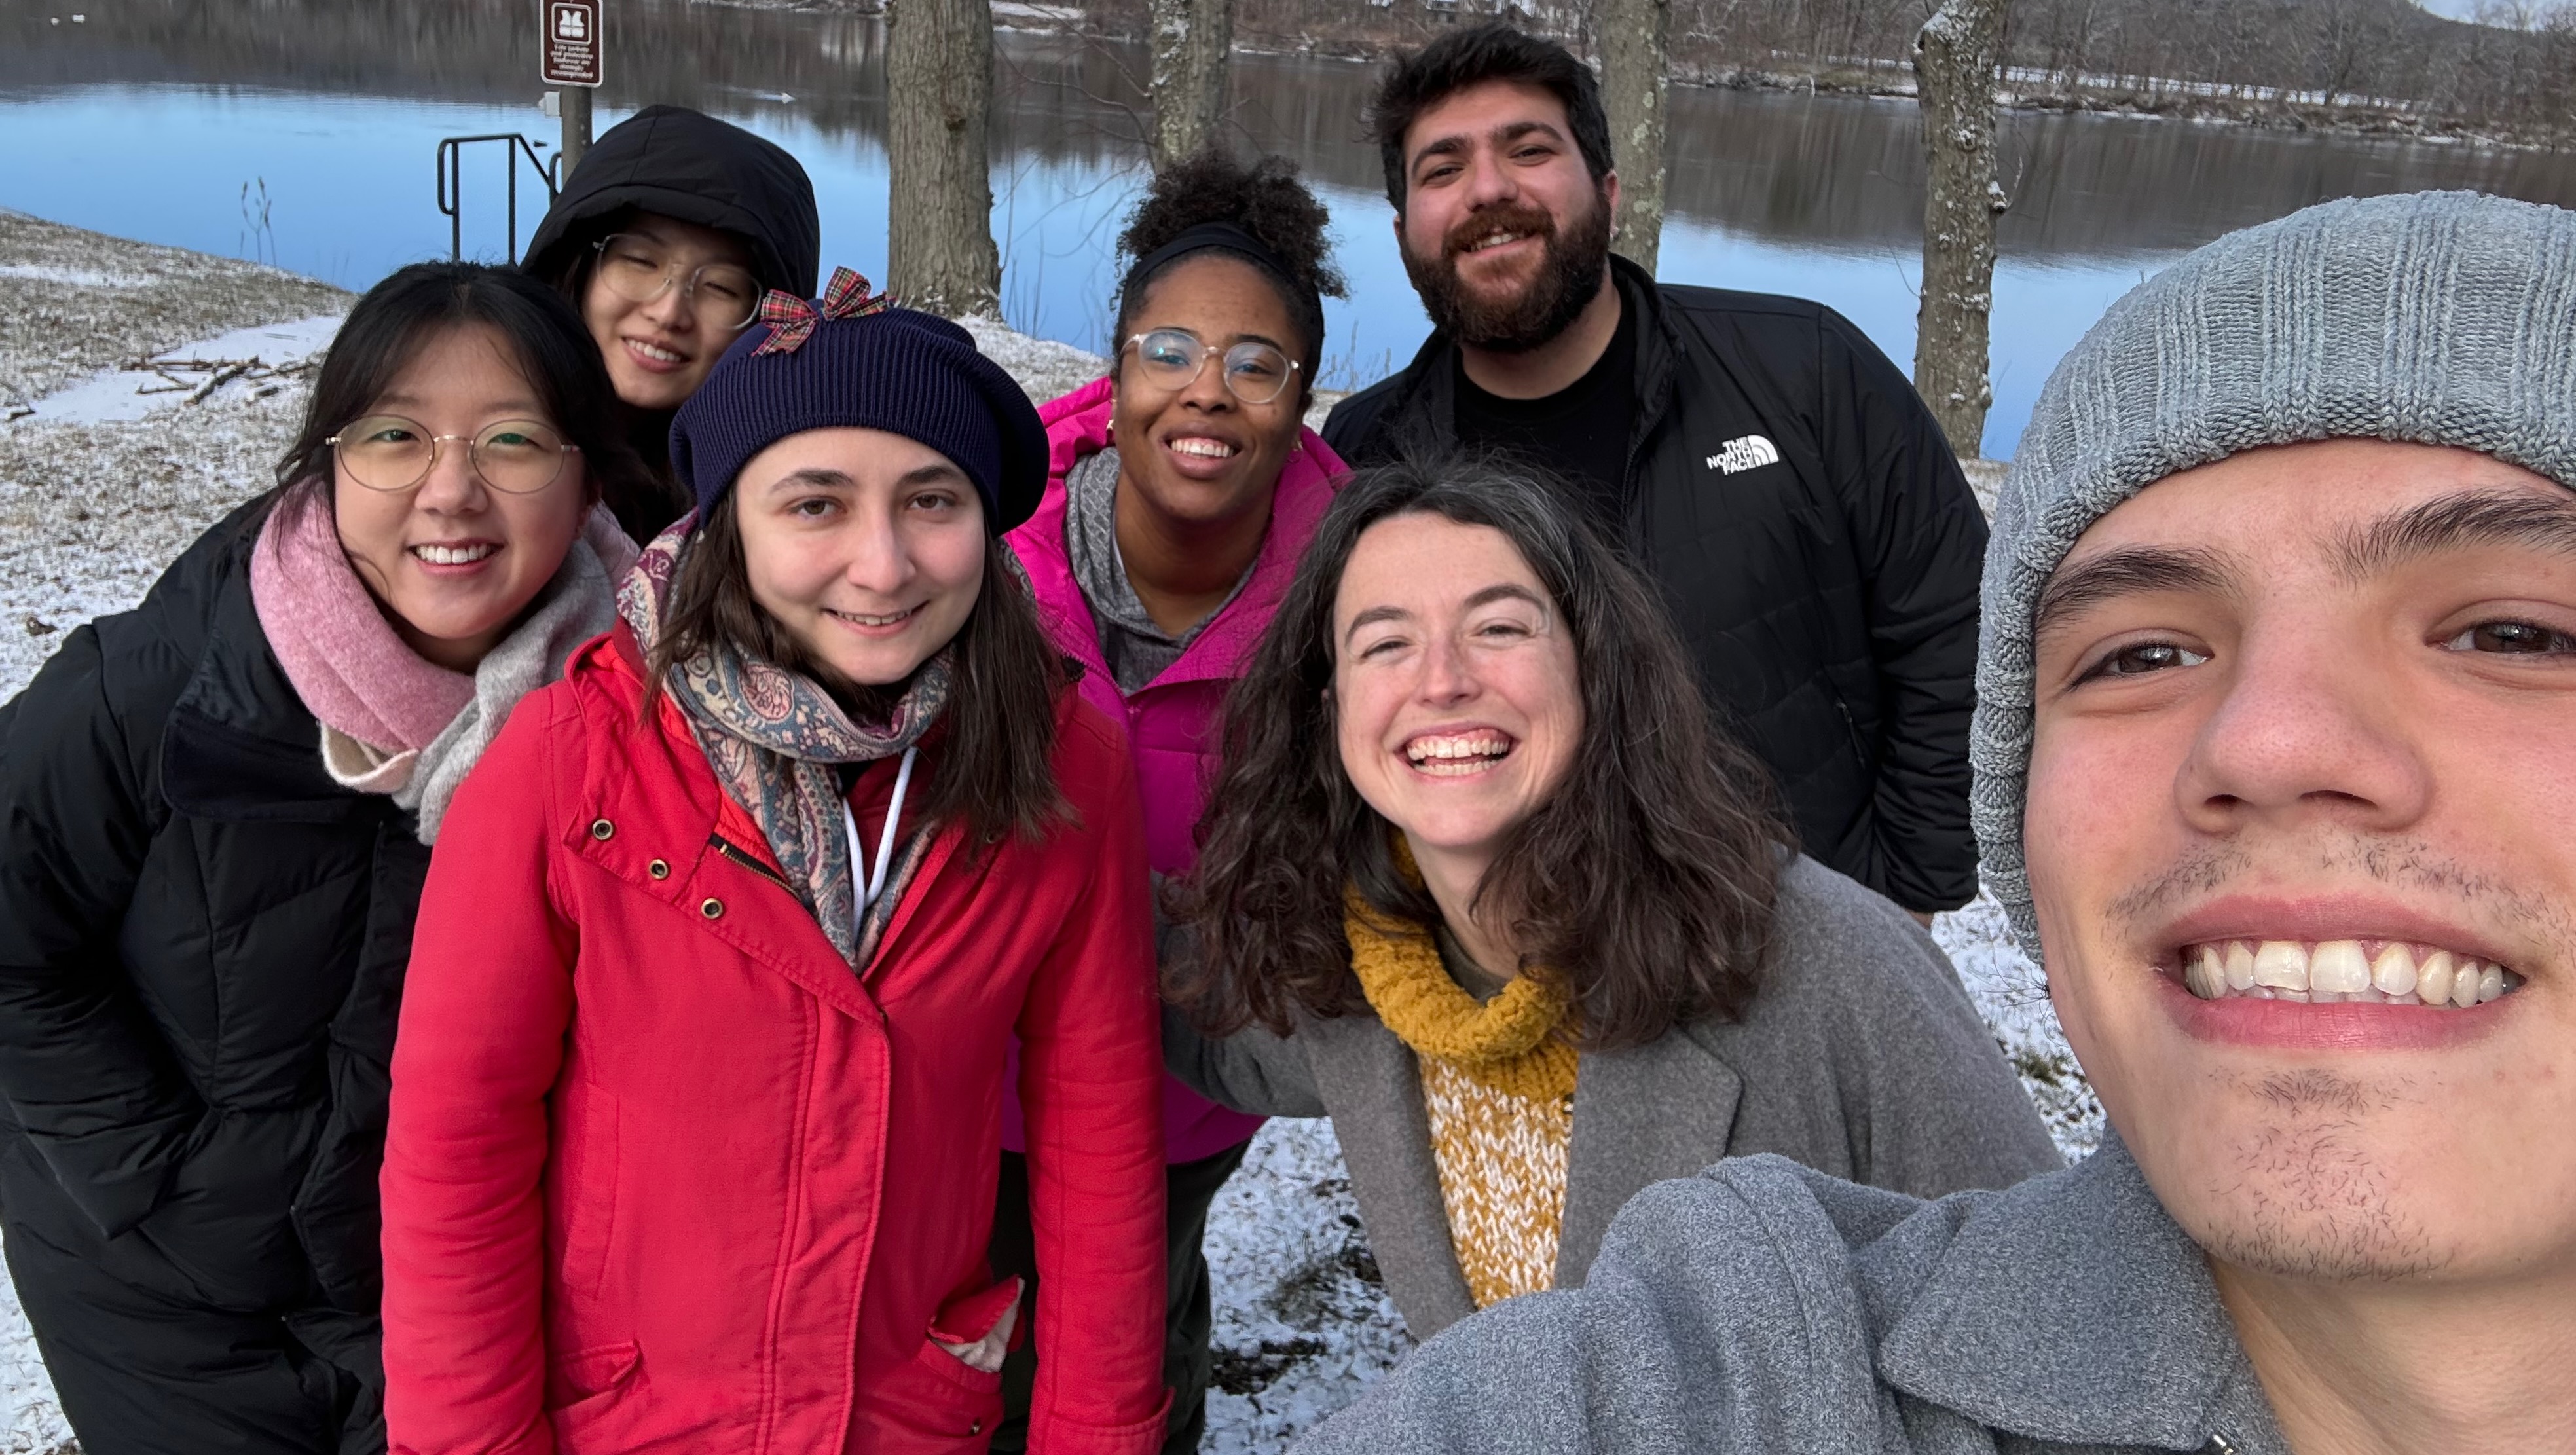 Selfie of a group of graduate students outdoors during the winter, standing in front of a frozen pond.